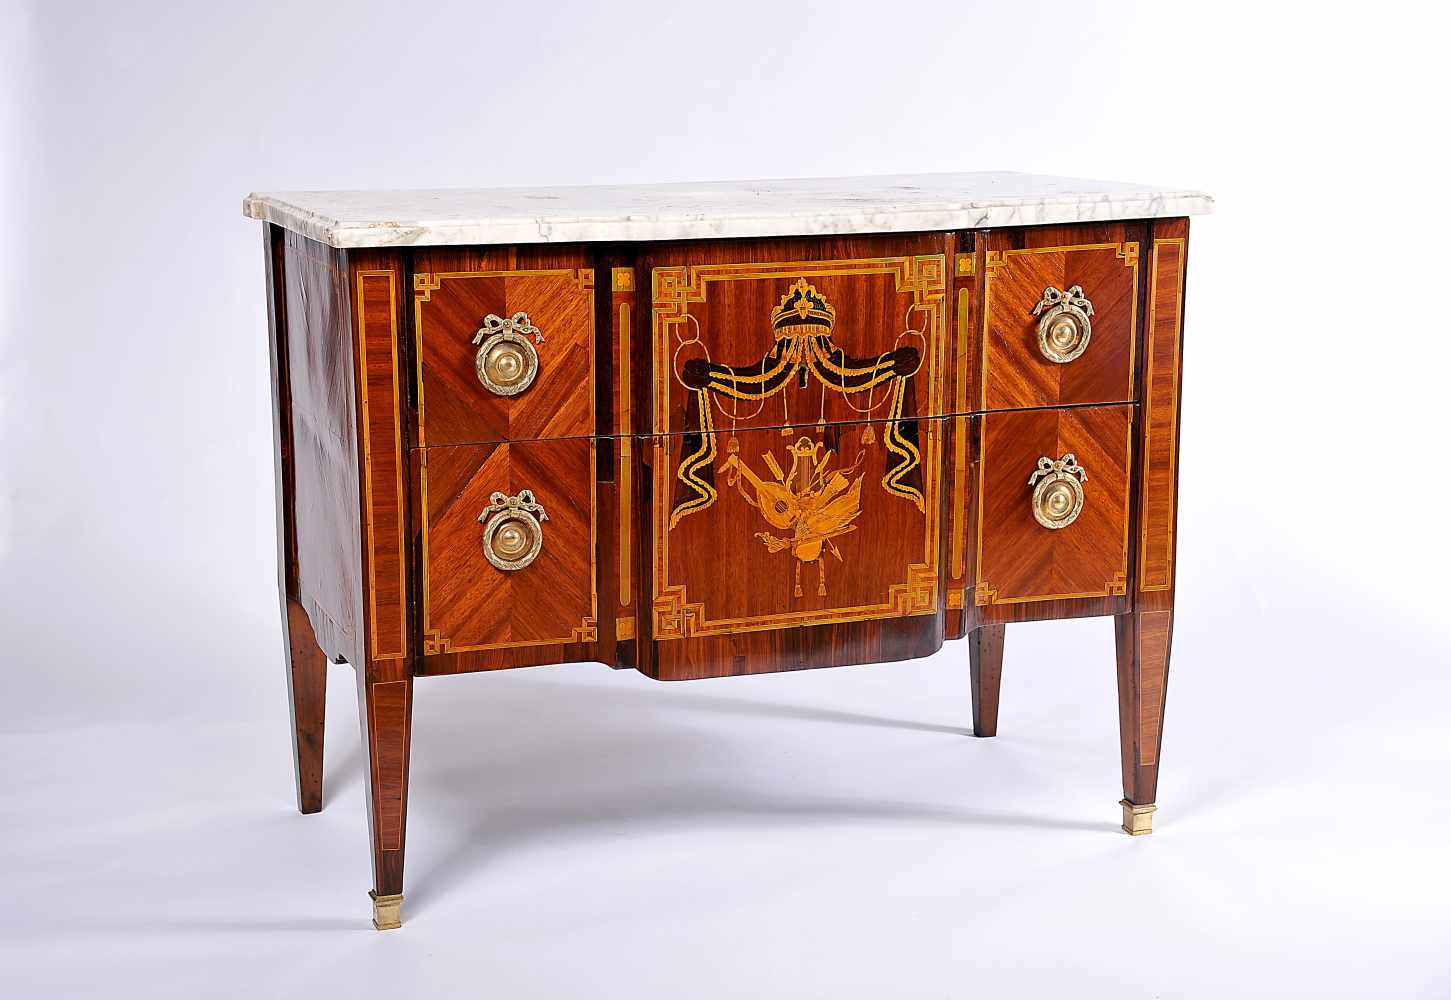 A Chest of Drawers, neoclassical, Brazilian rosewood, satinwood and greenwood marquetry "Baldachin